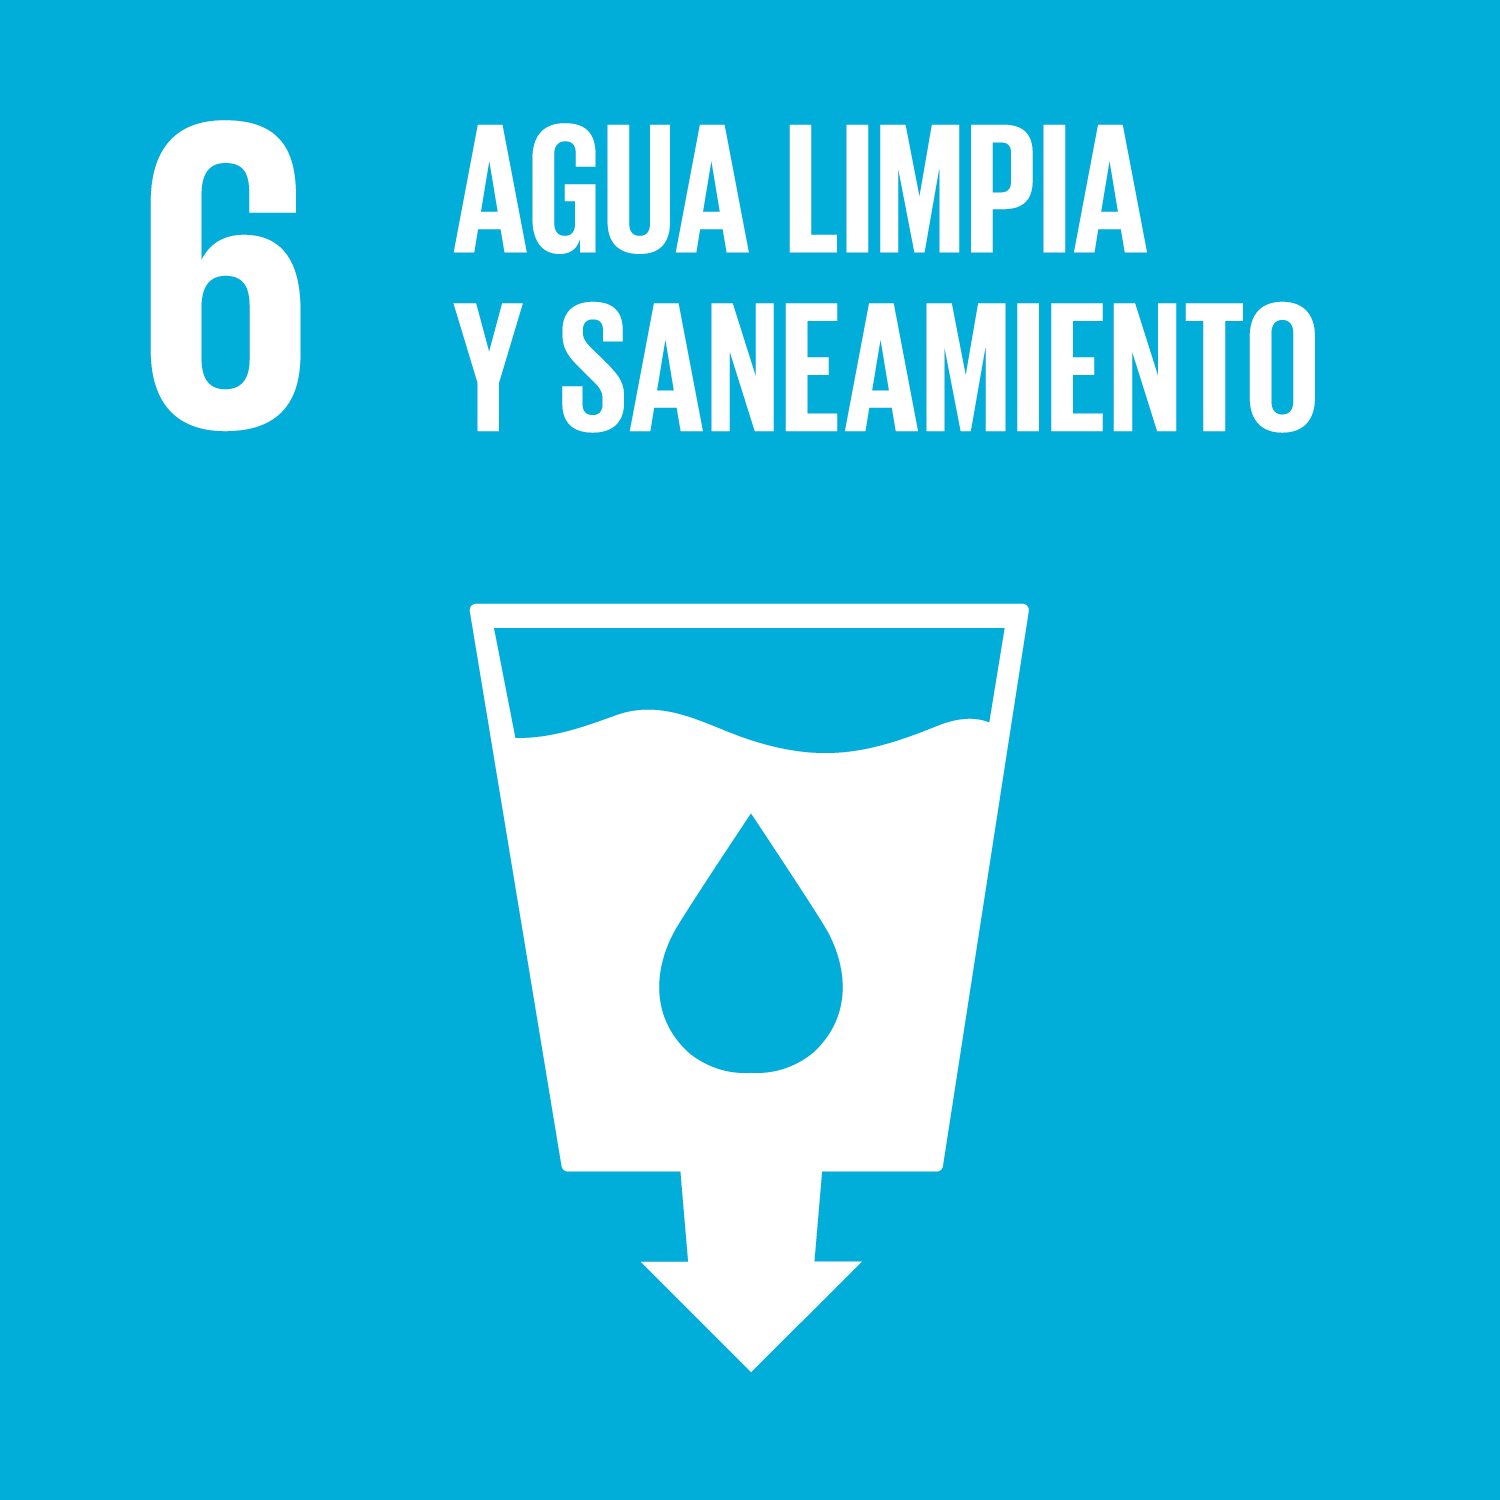 ODS Objetivo 6: Clean Water and Sanitation